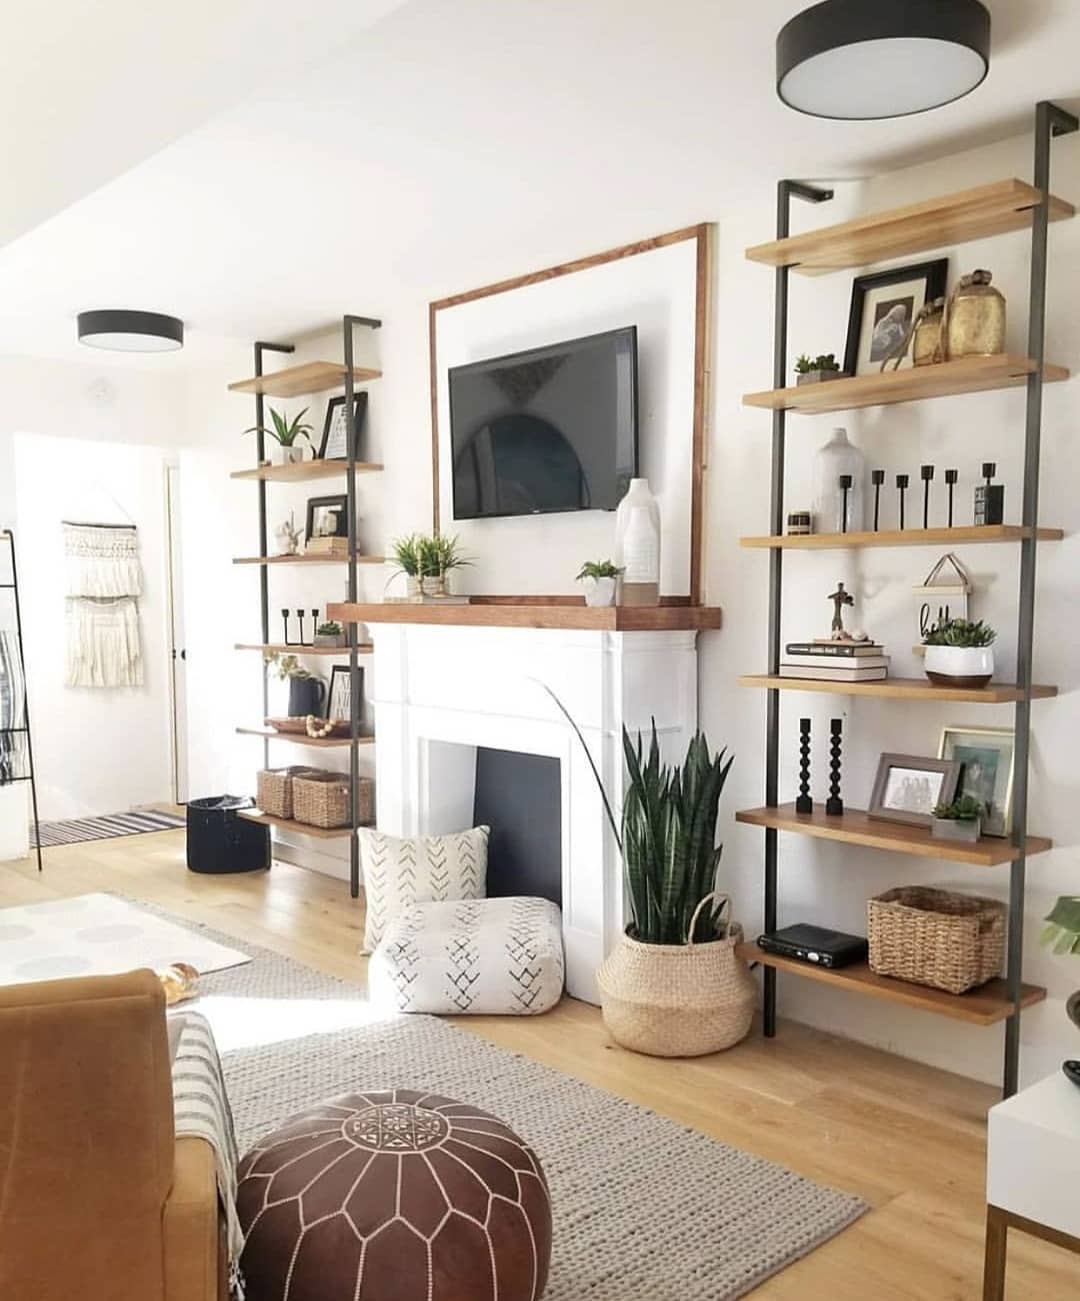 Living room painted white with brown decor for a Feng Shui design. Photo t\by Instagram user @kaza.karis